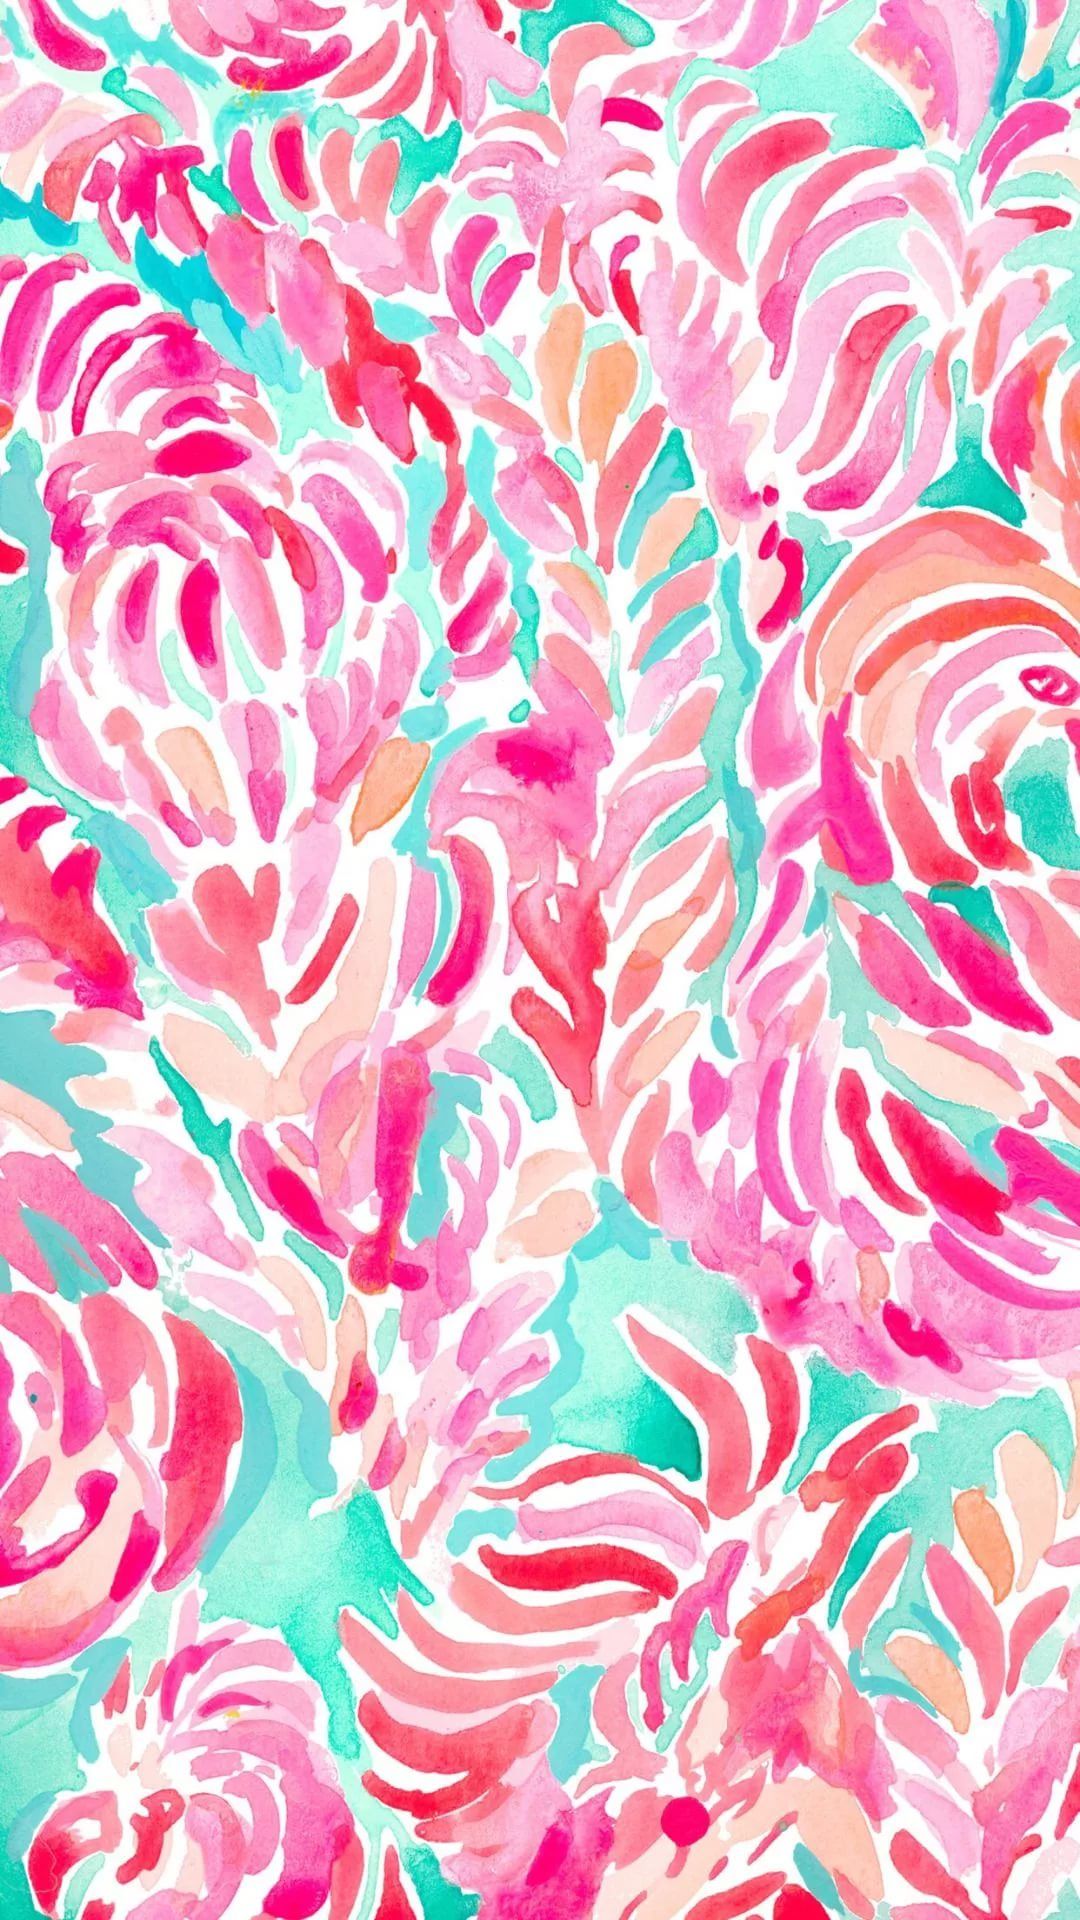 Lilly Pulitzer iPhone hd wallpaper